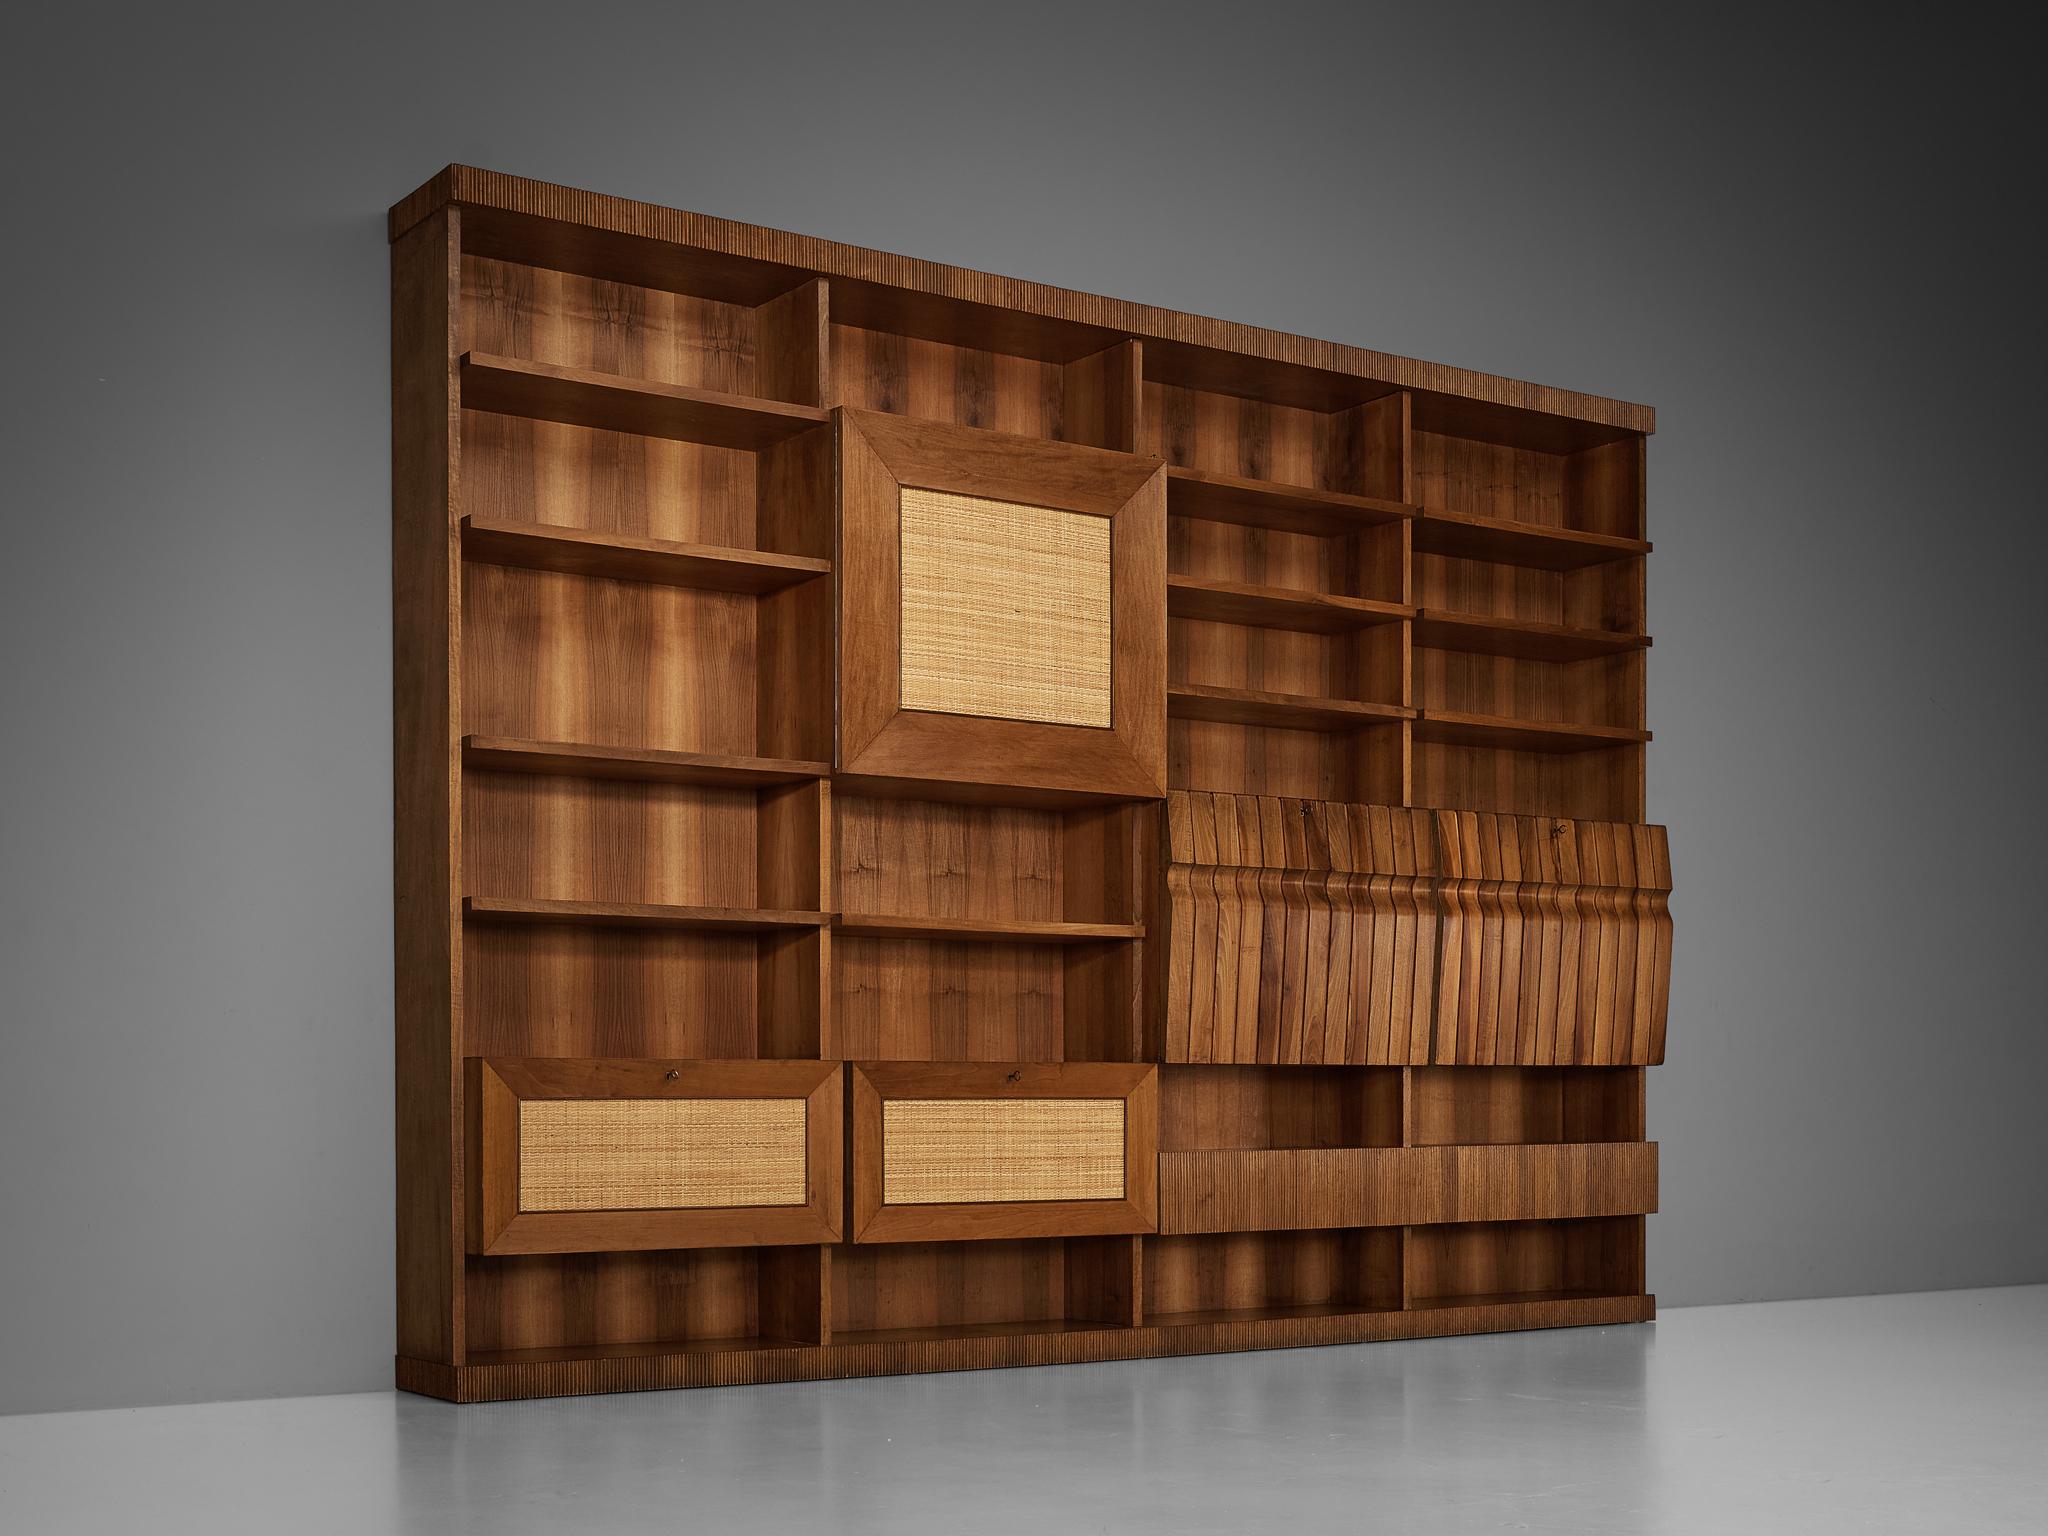 Library, walnut, cherry, grasscloth, Italy, 1950s

This delightful bookcase reflects the design principles of the Mid-Century era that rose to prominence in the 1950s and 1960s. The composition is based on four identically sized columns, each